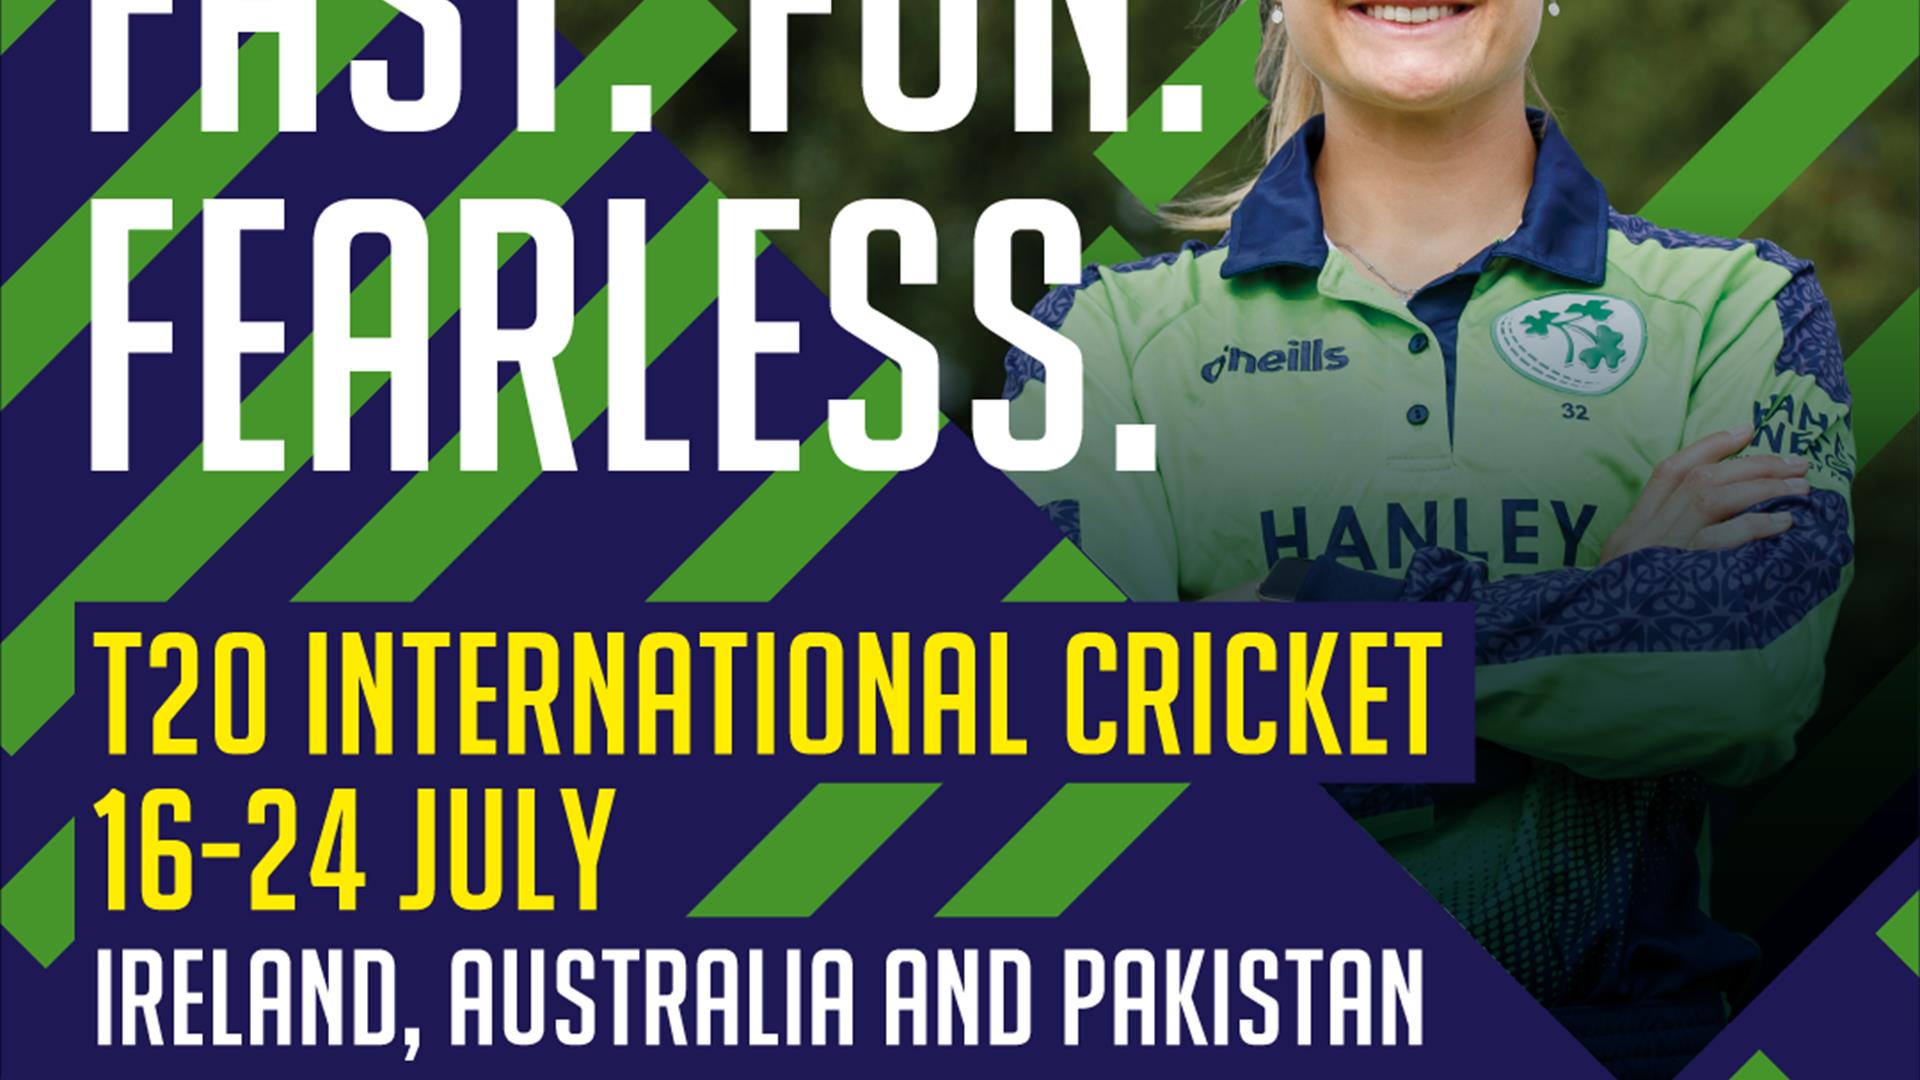 A picture of Ireland Women player Gaby Lewis promoting an upcoming cricket series between Ireland Women, Australia and Pakistan. The stripy green and